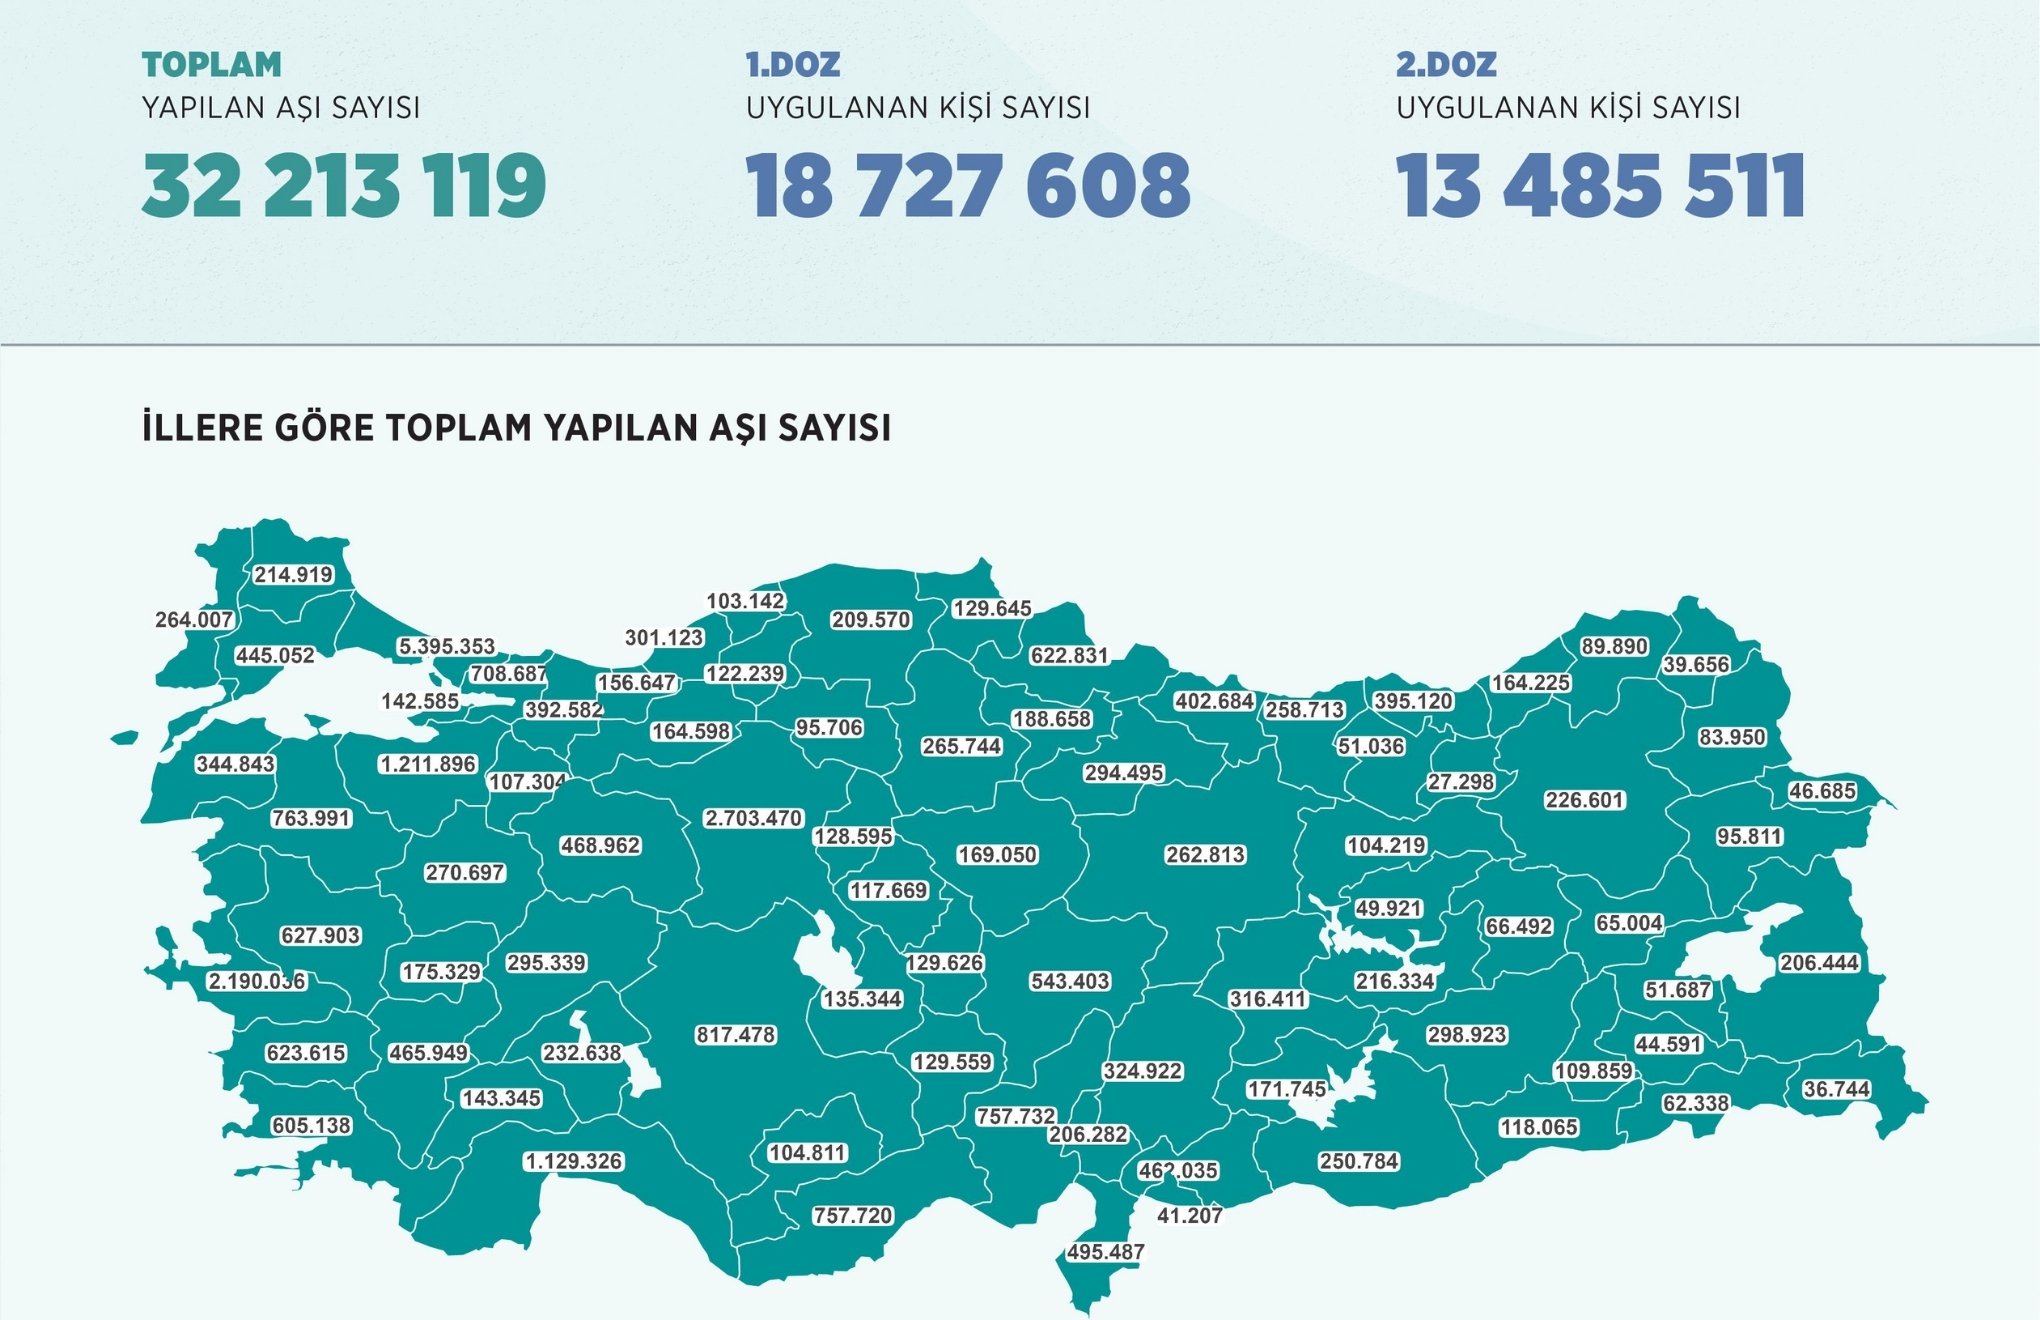 Nearly 3 million vaccine doses administered in Turkey in 10 days